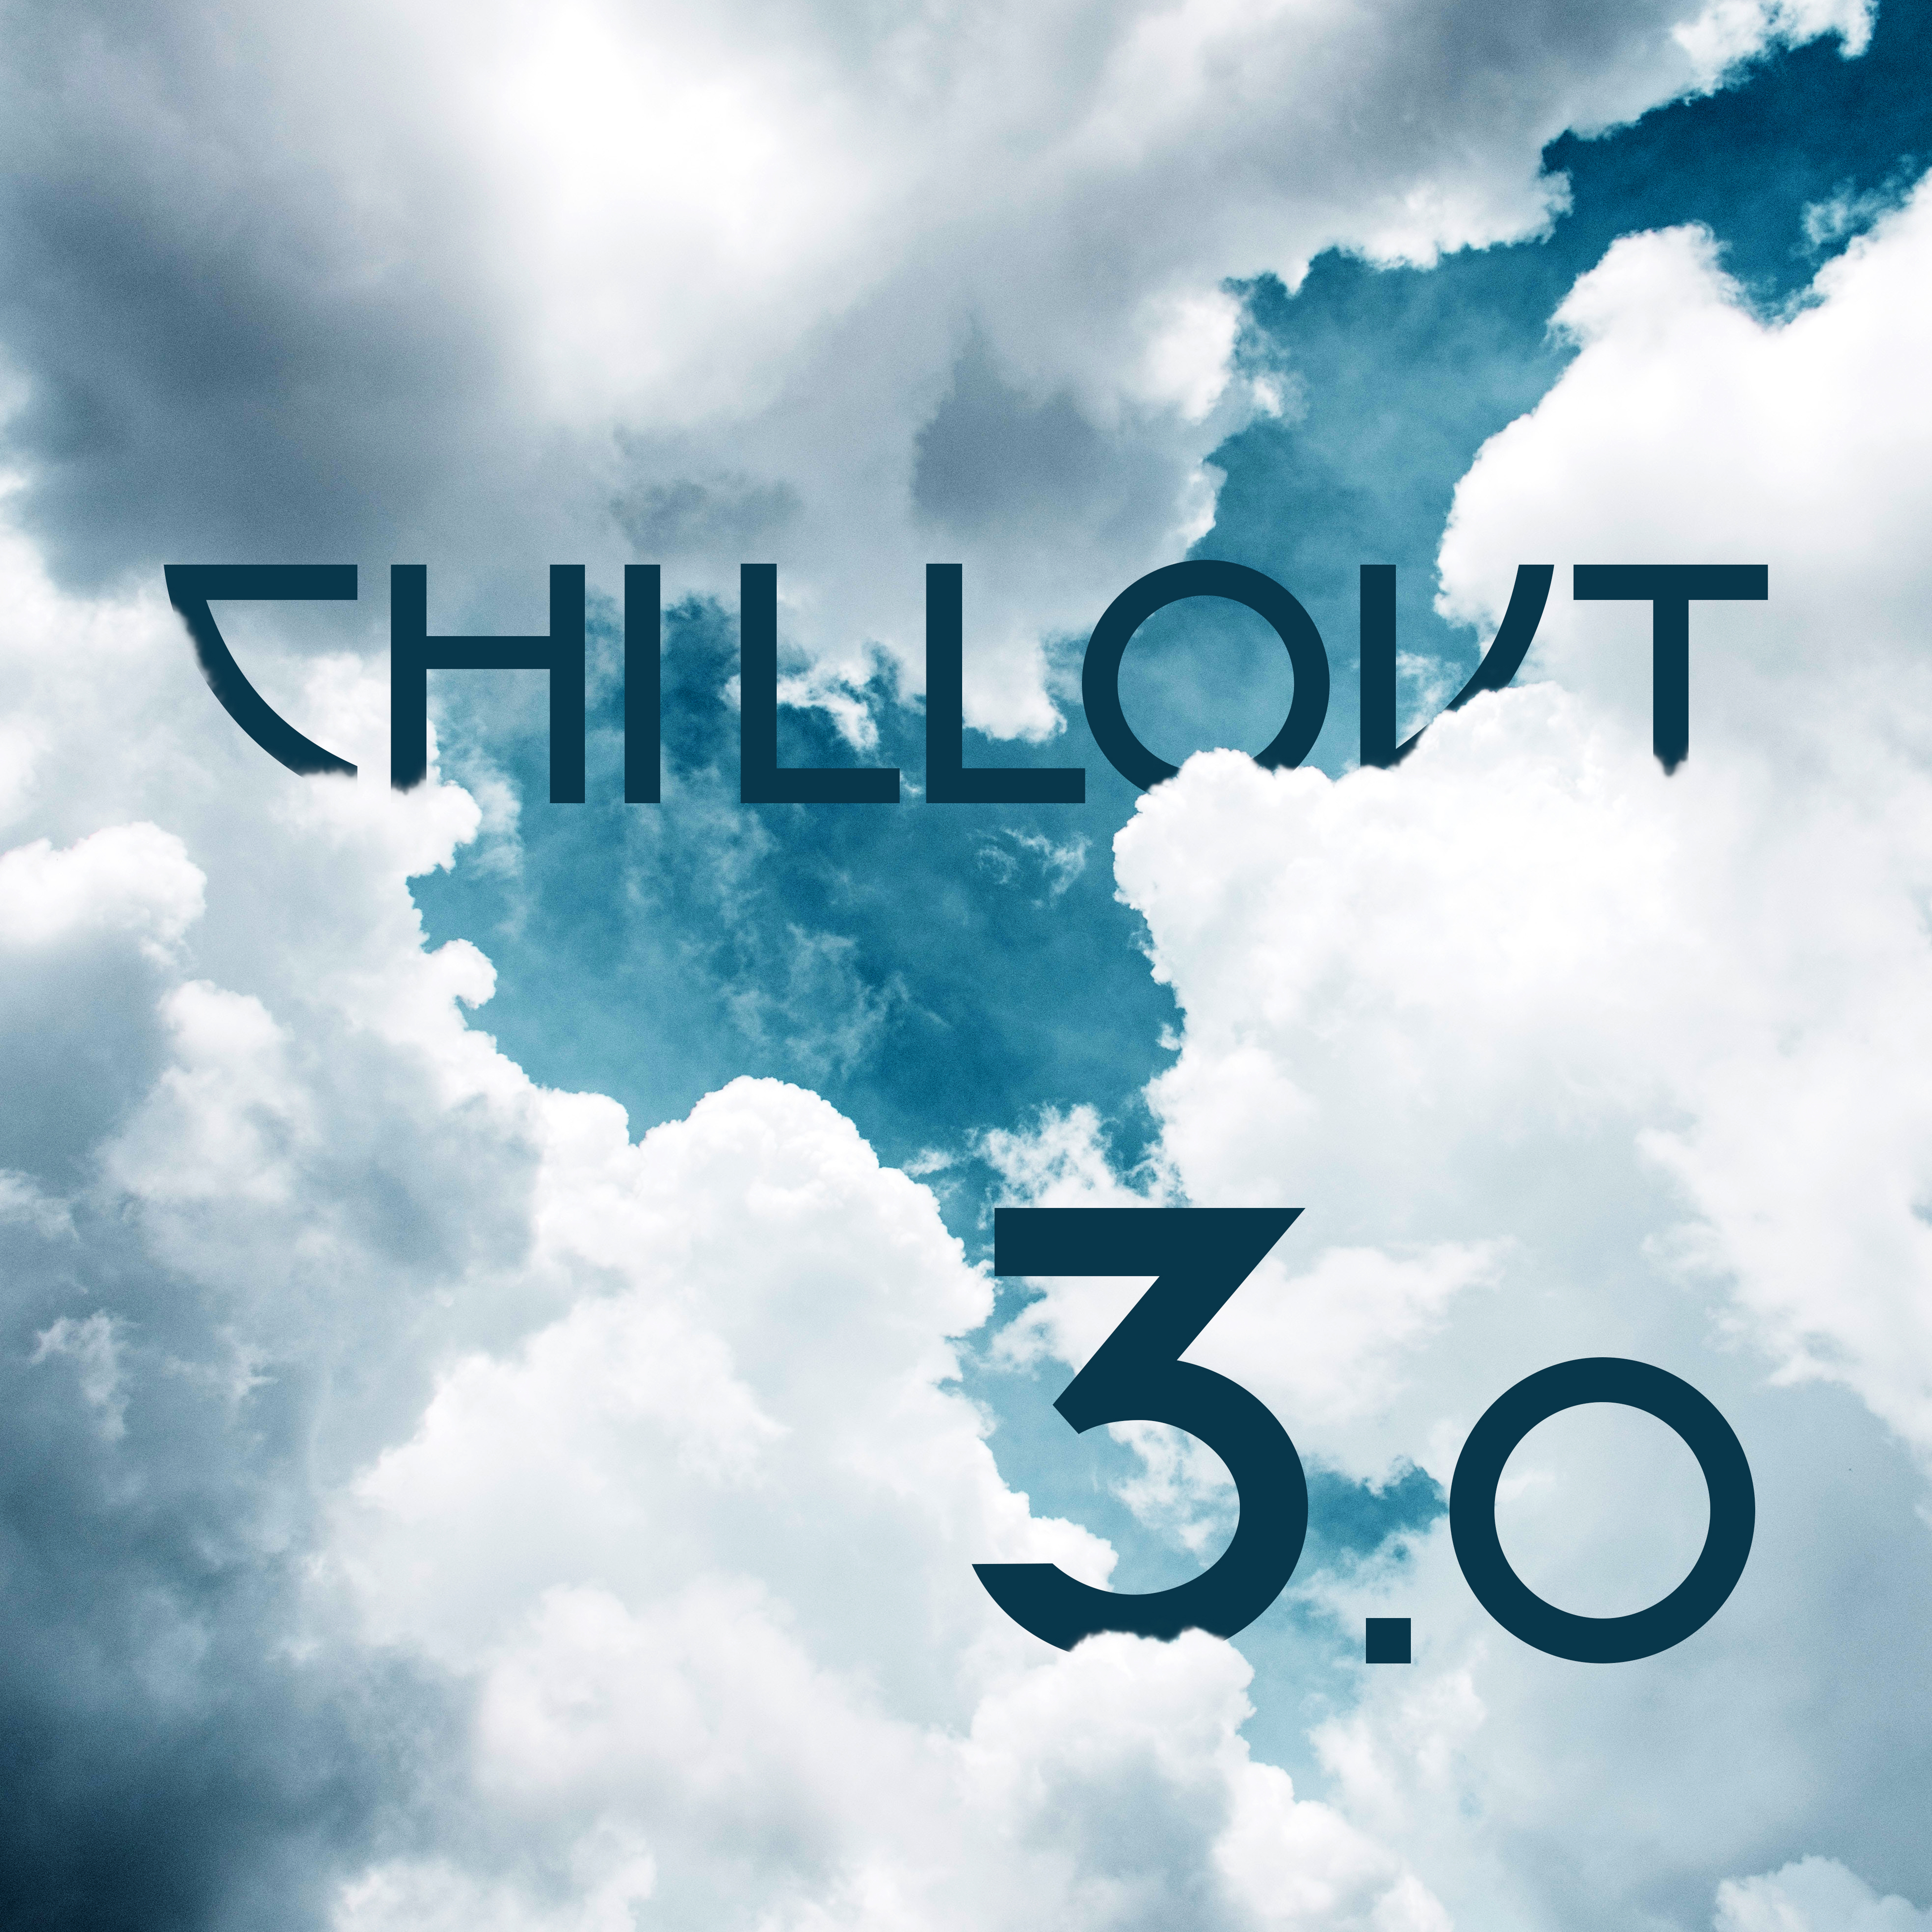 Chillout 3.0